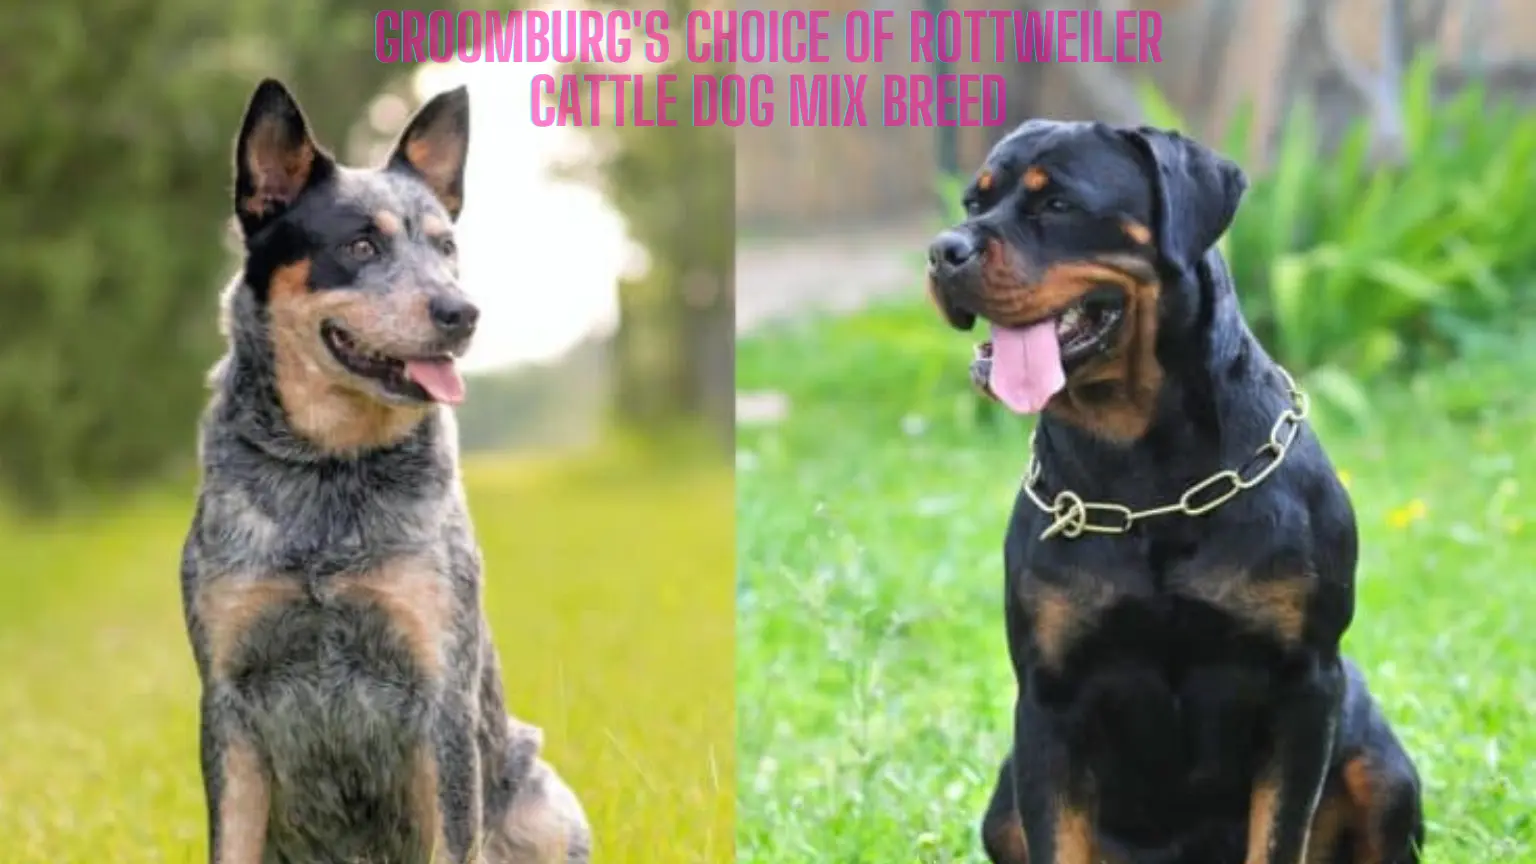 Rottweiler Cattle Dog Mix Breed